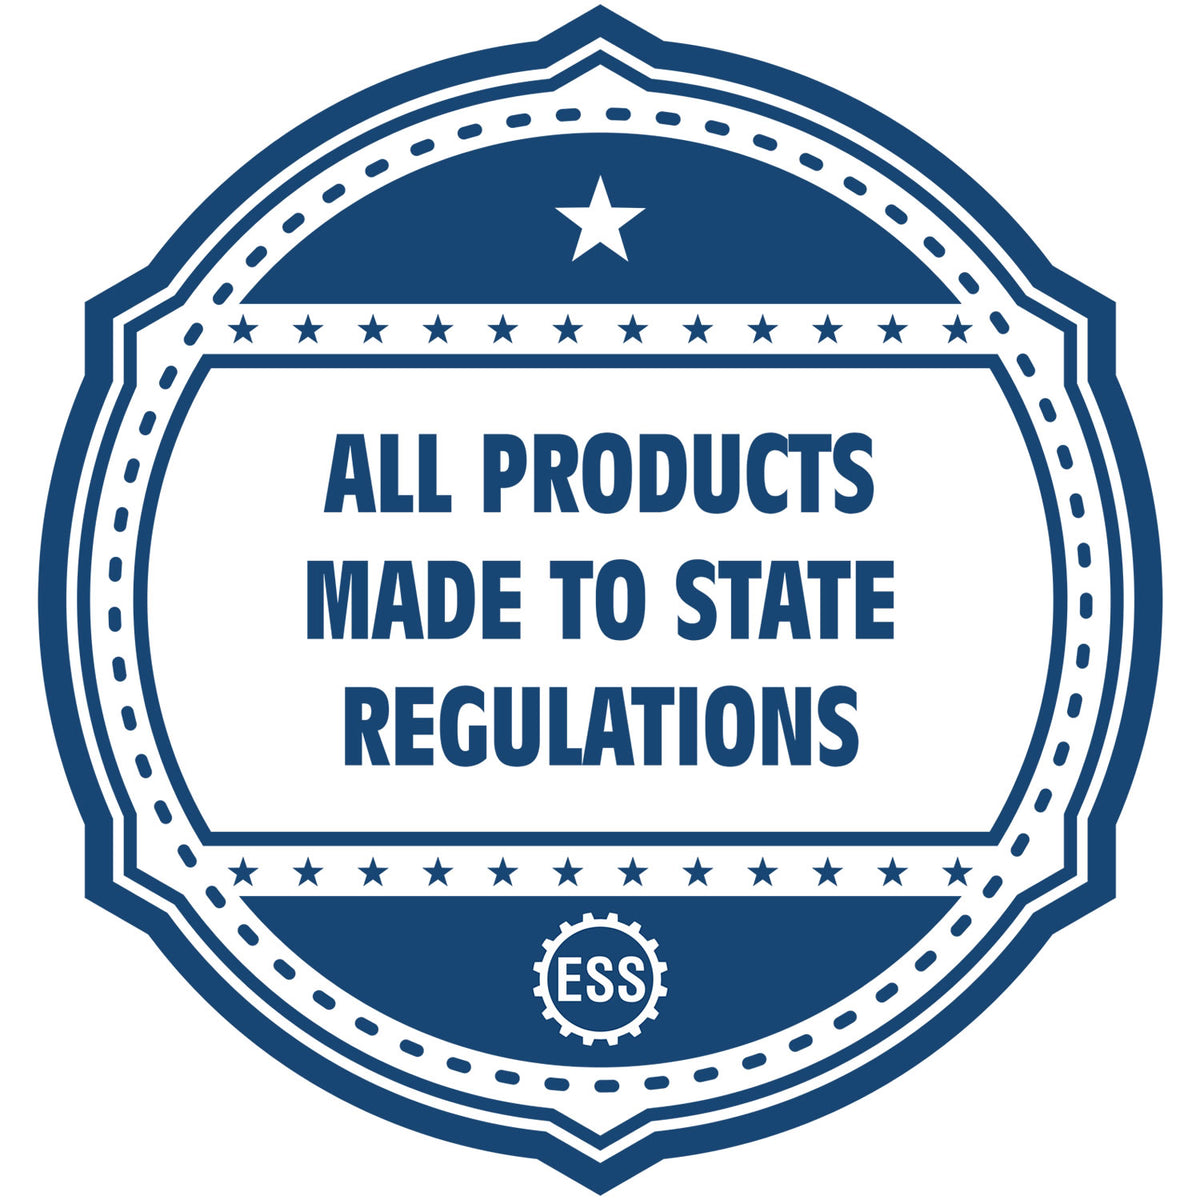 A blue icon or badge for the Soft Michigan Professional Geologist Seal showing that this product is made in compliance with state regulations.